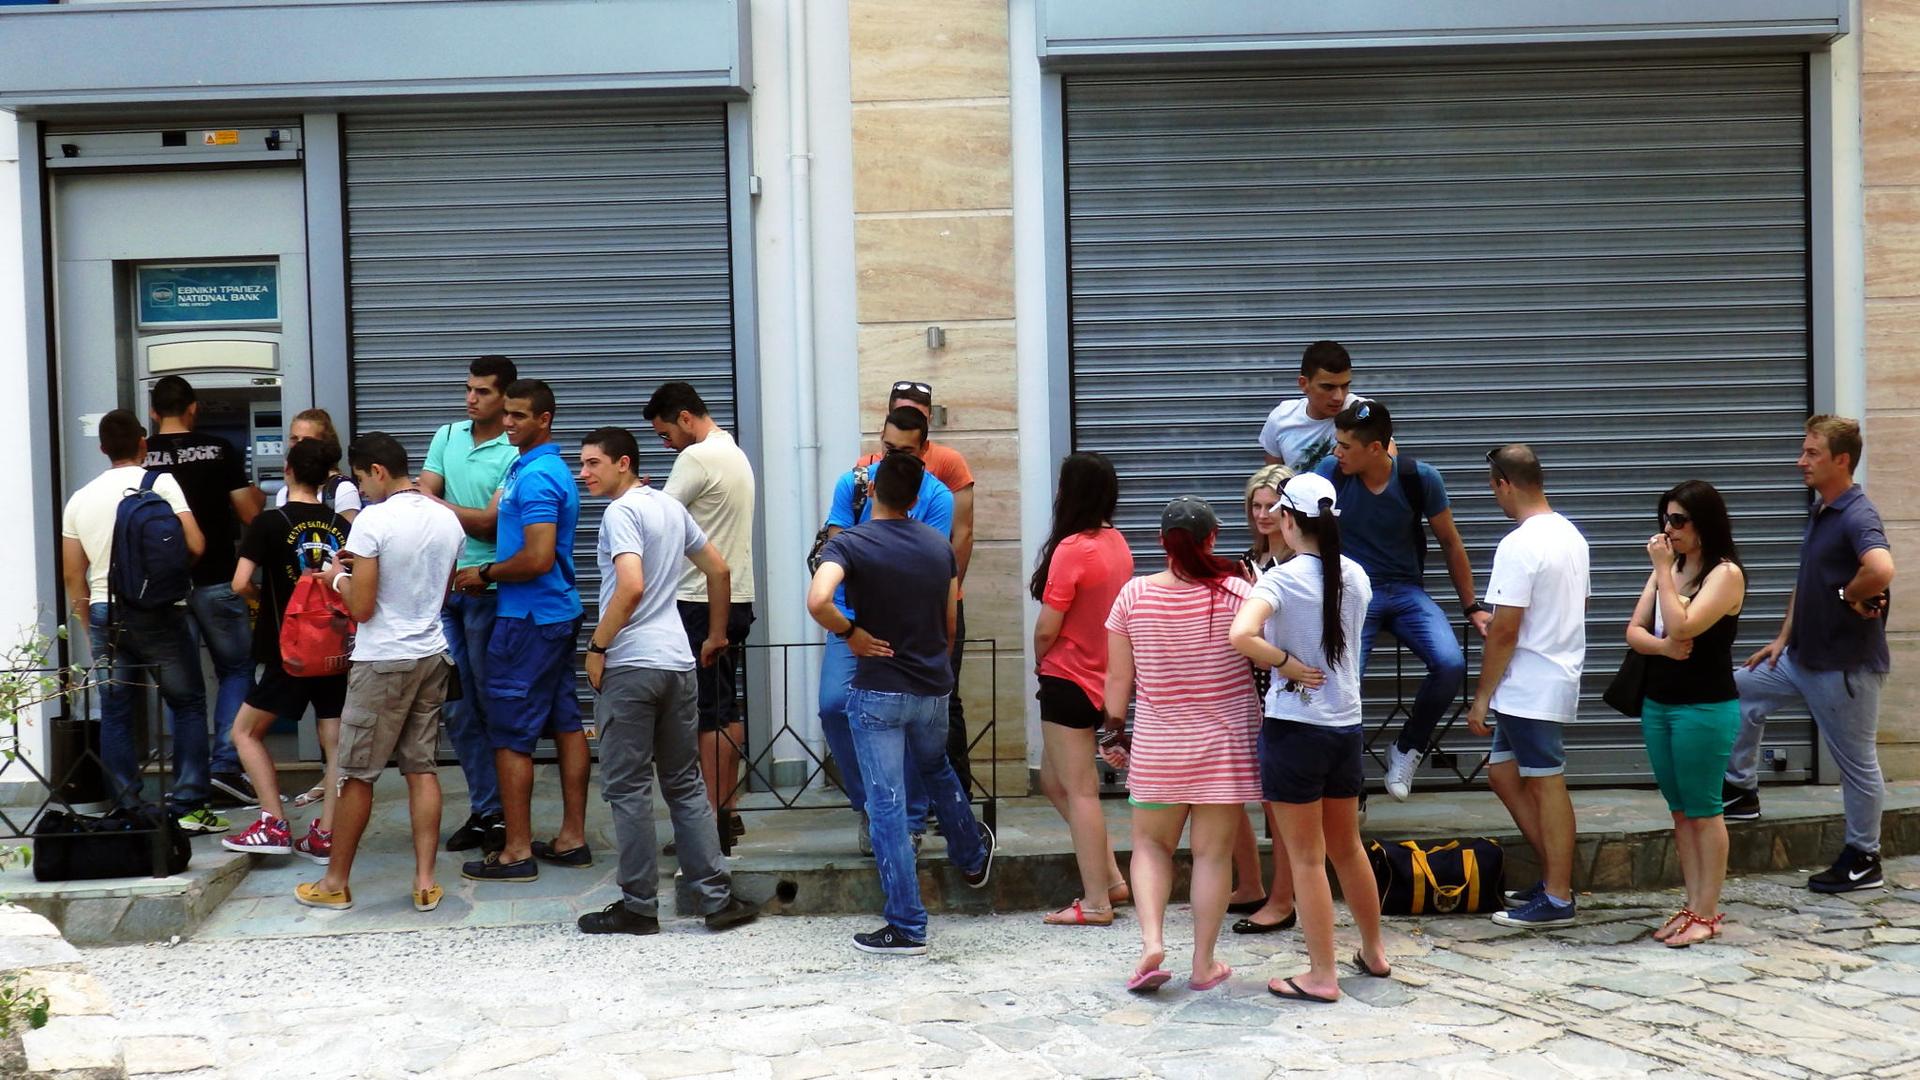 People lined up outside of an ATM in Greece.